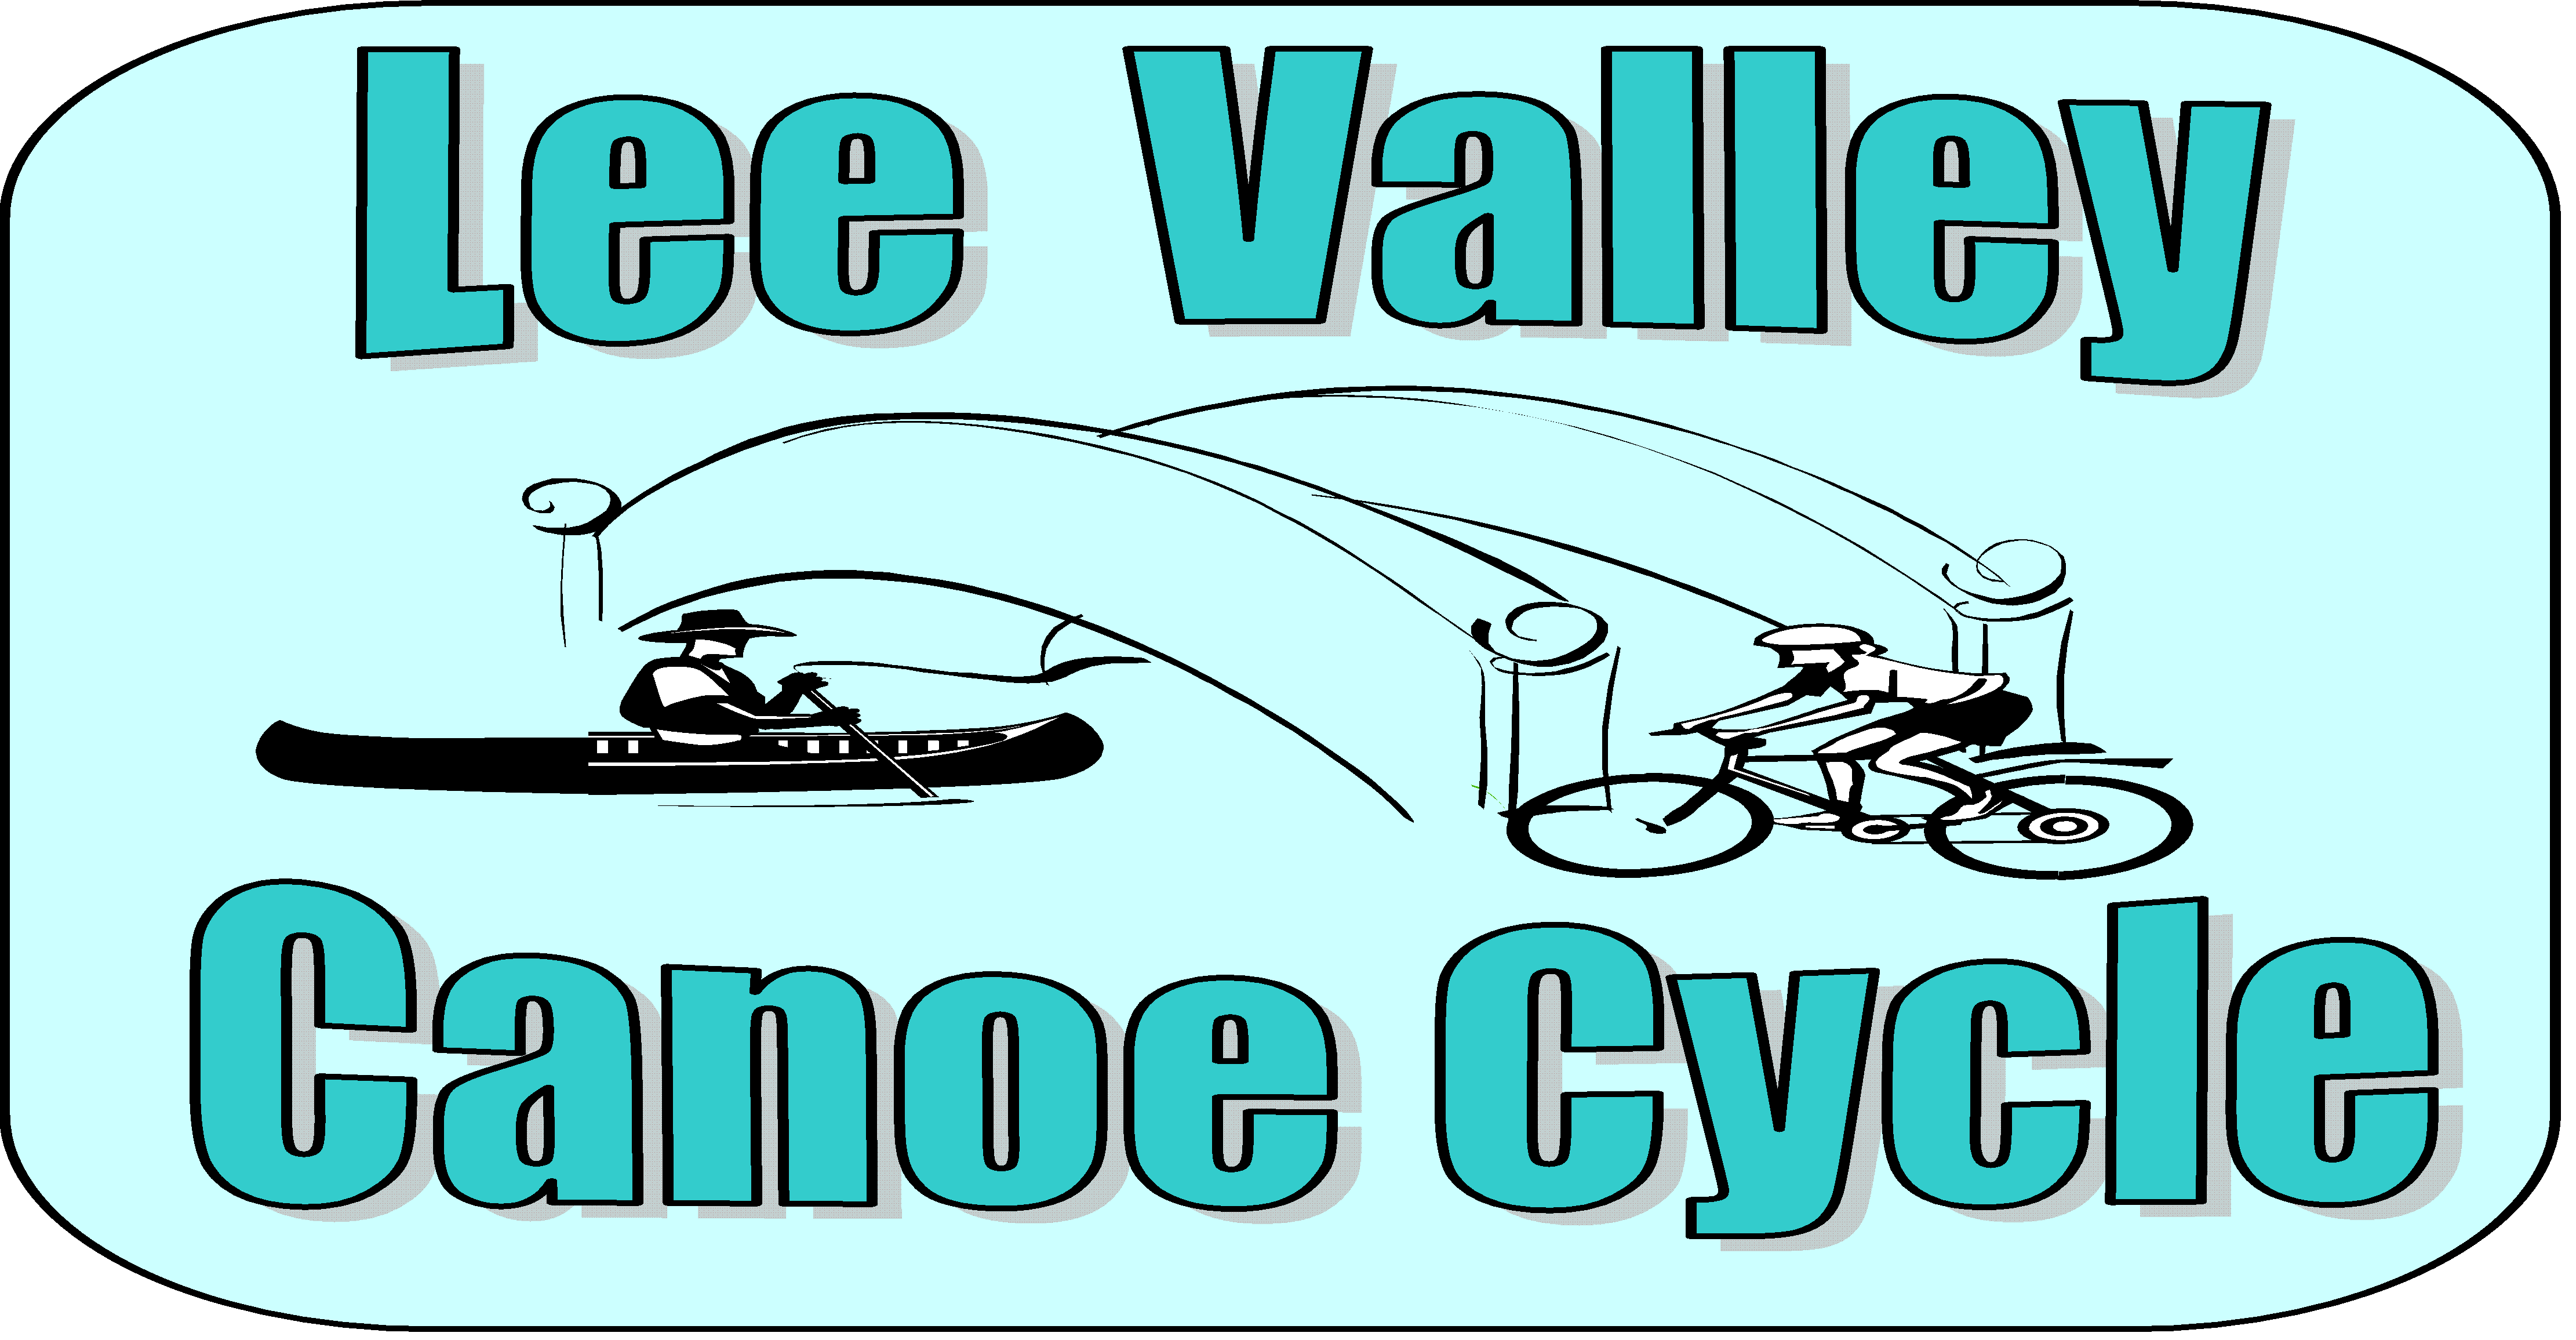 Lee Valley Canoe Cycle